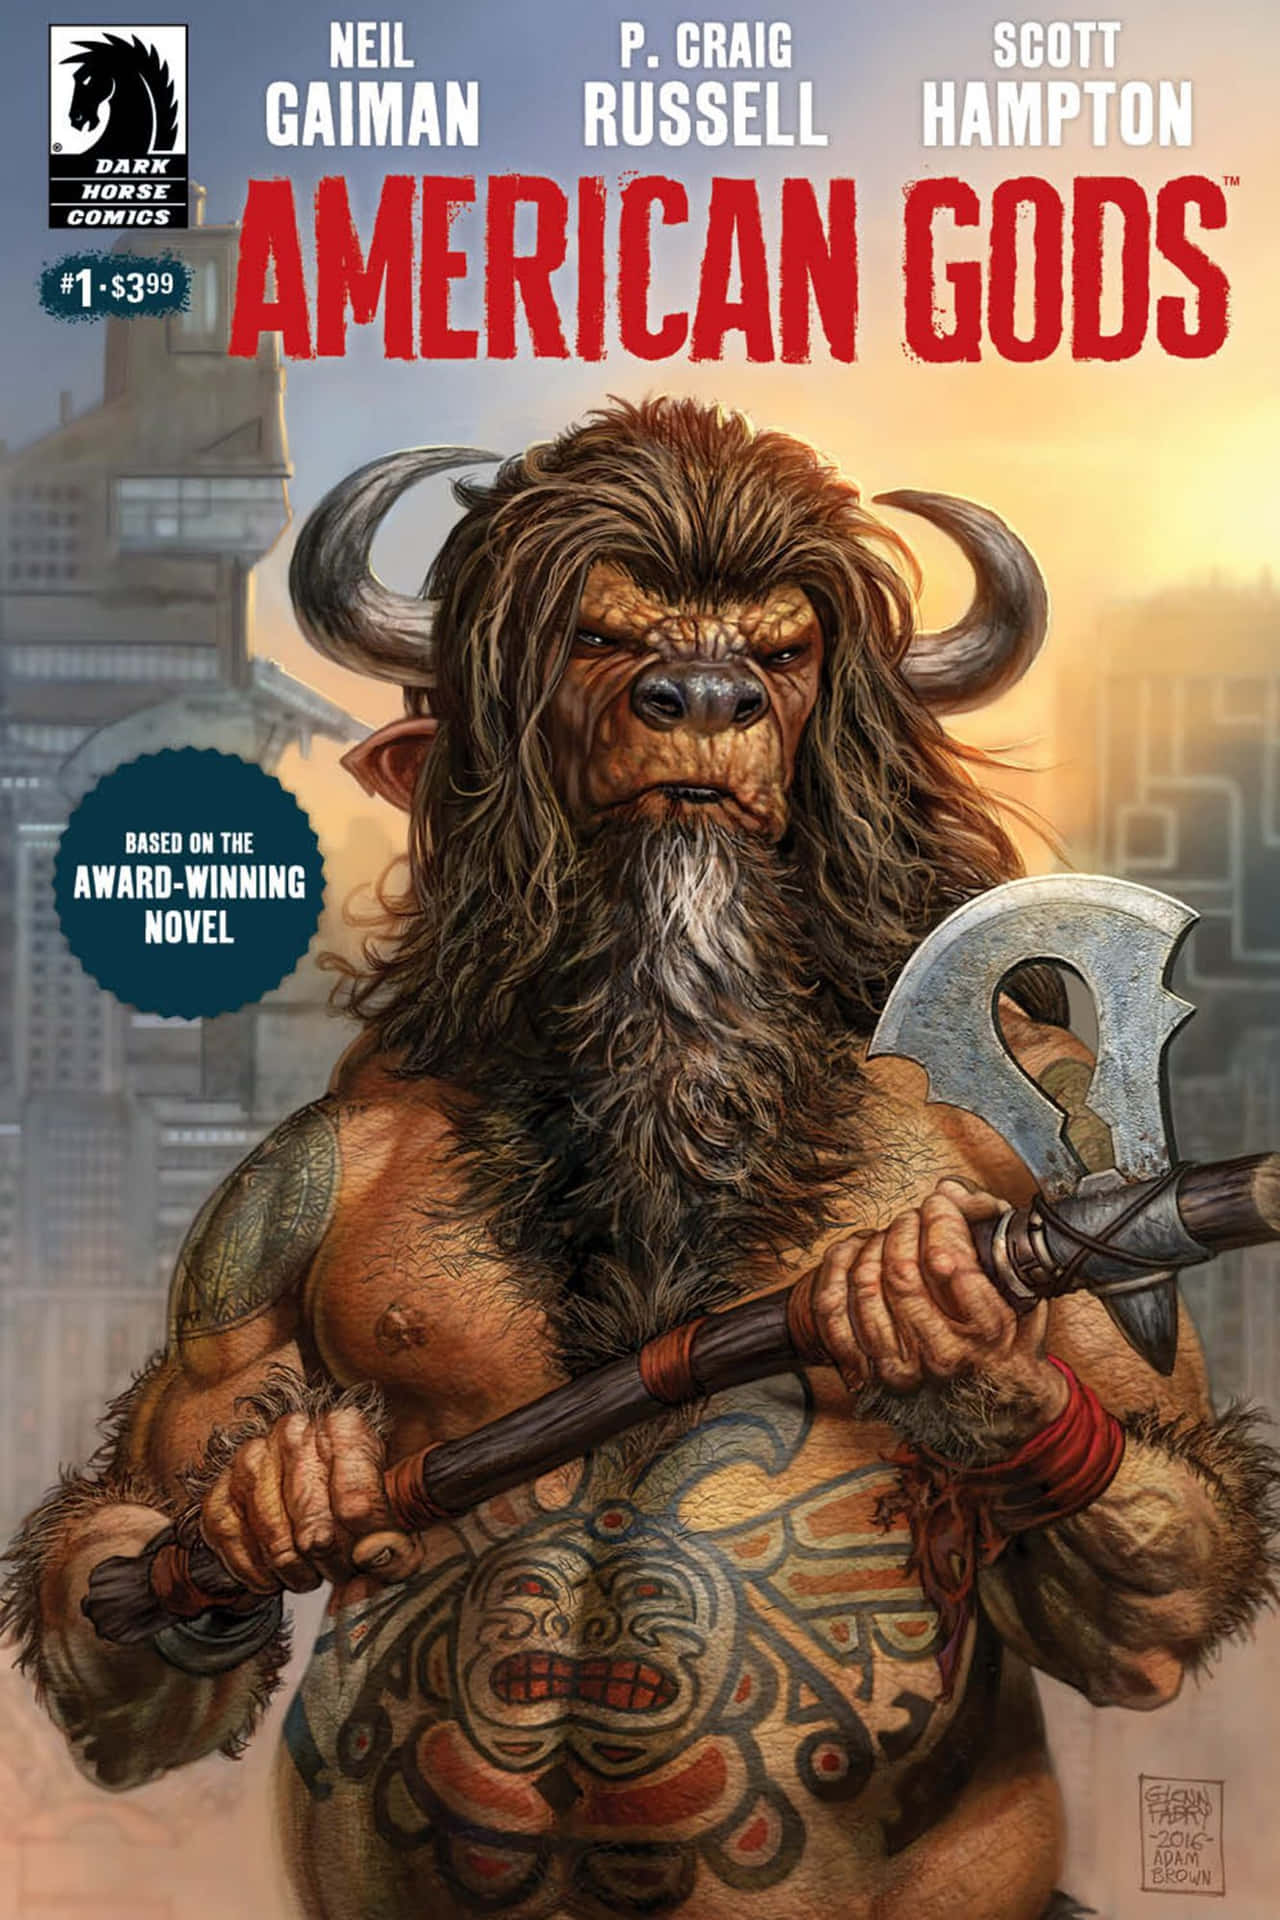 A Fantasy Journey with American Gods